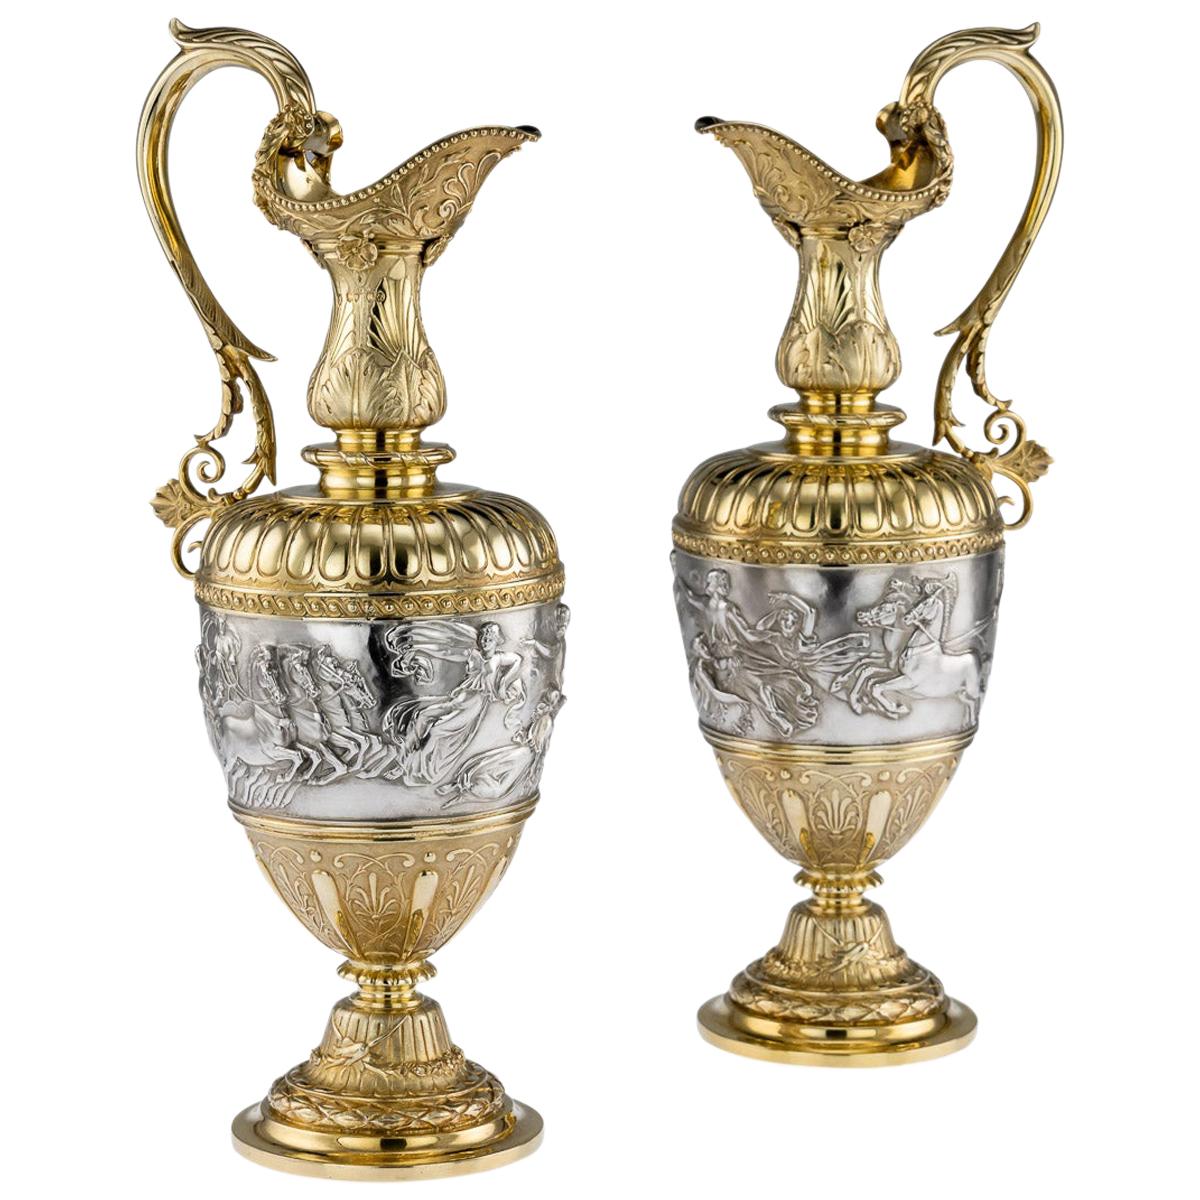 Victorian Silver-Gilt Pair of Wine Ewers by Elkington & Co, circa 1878